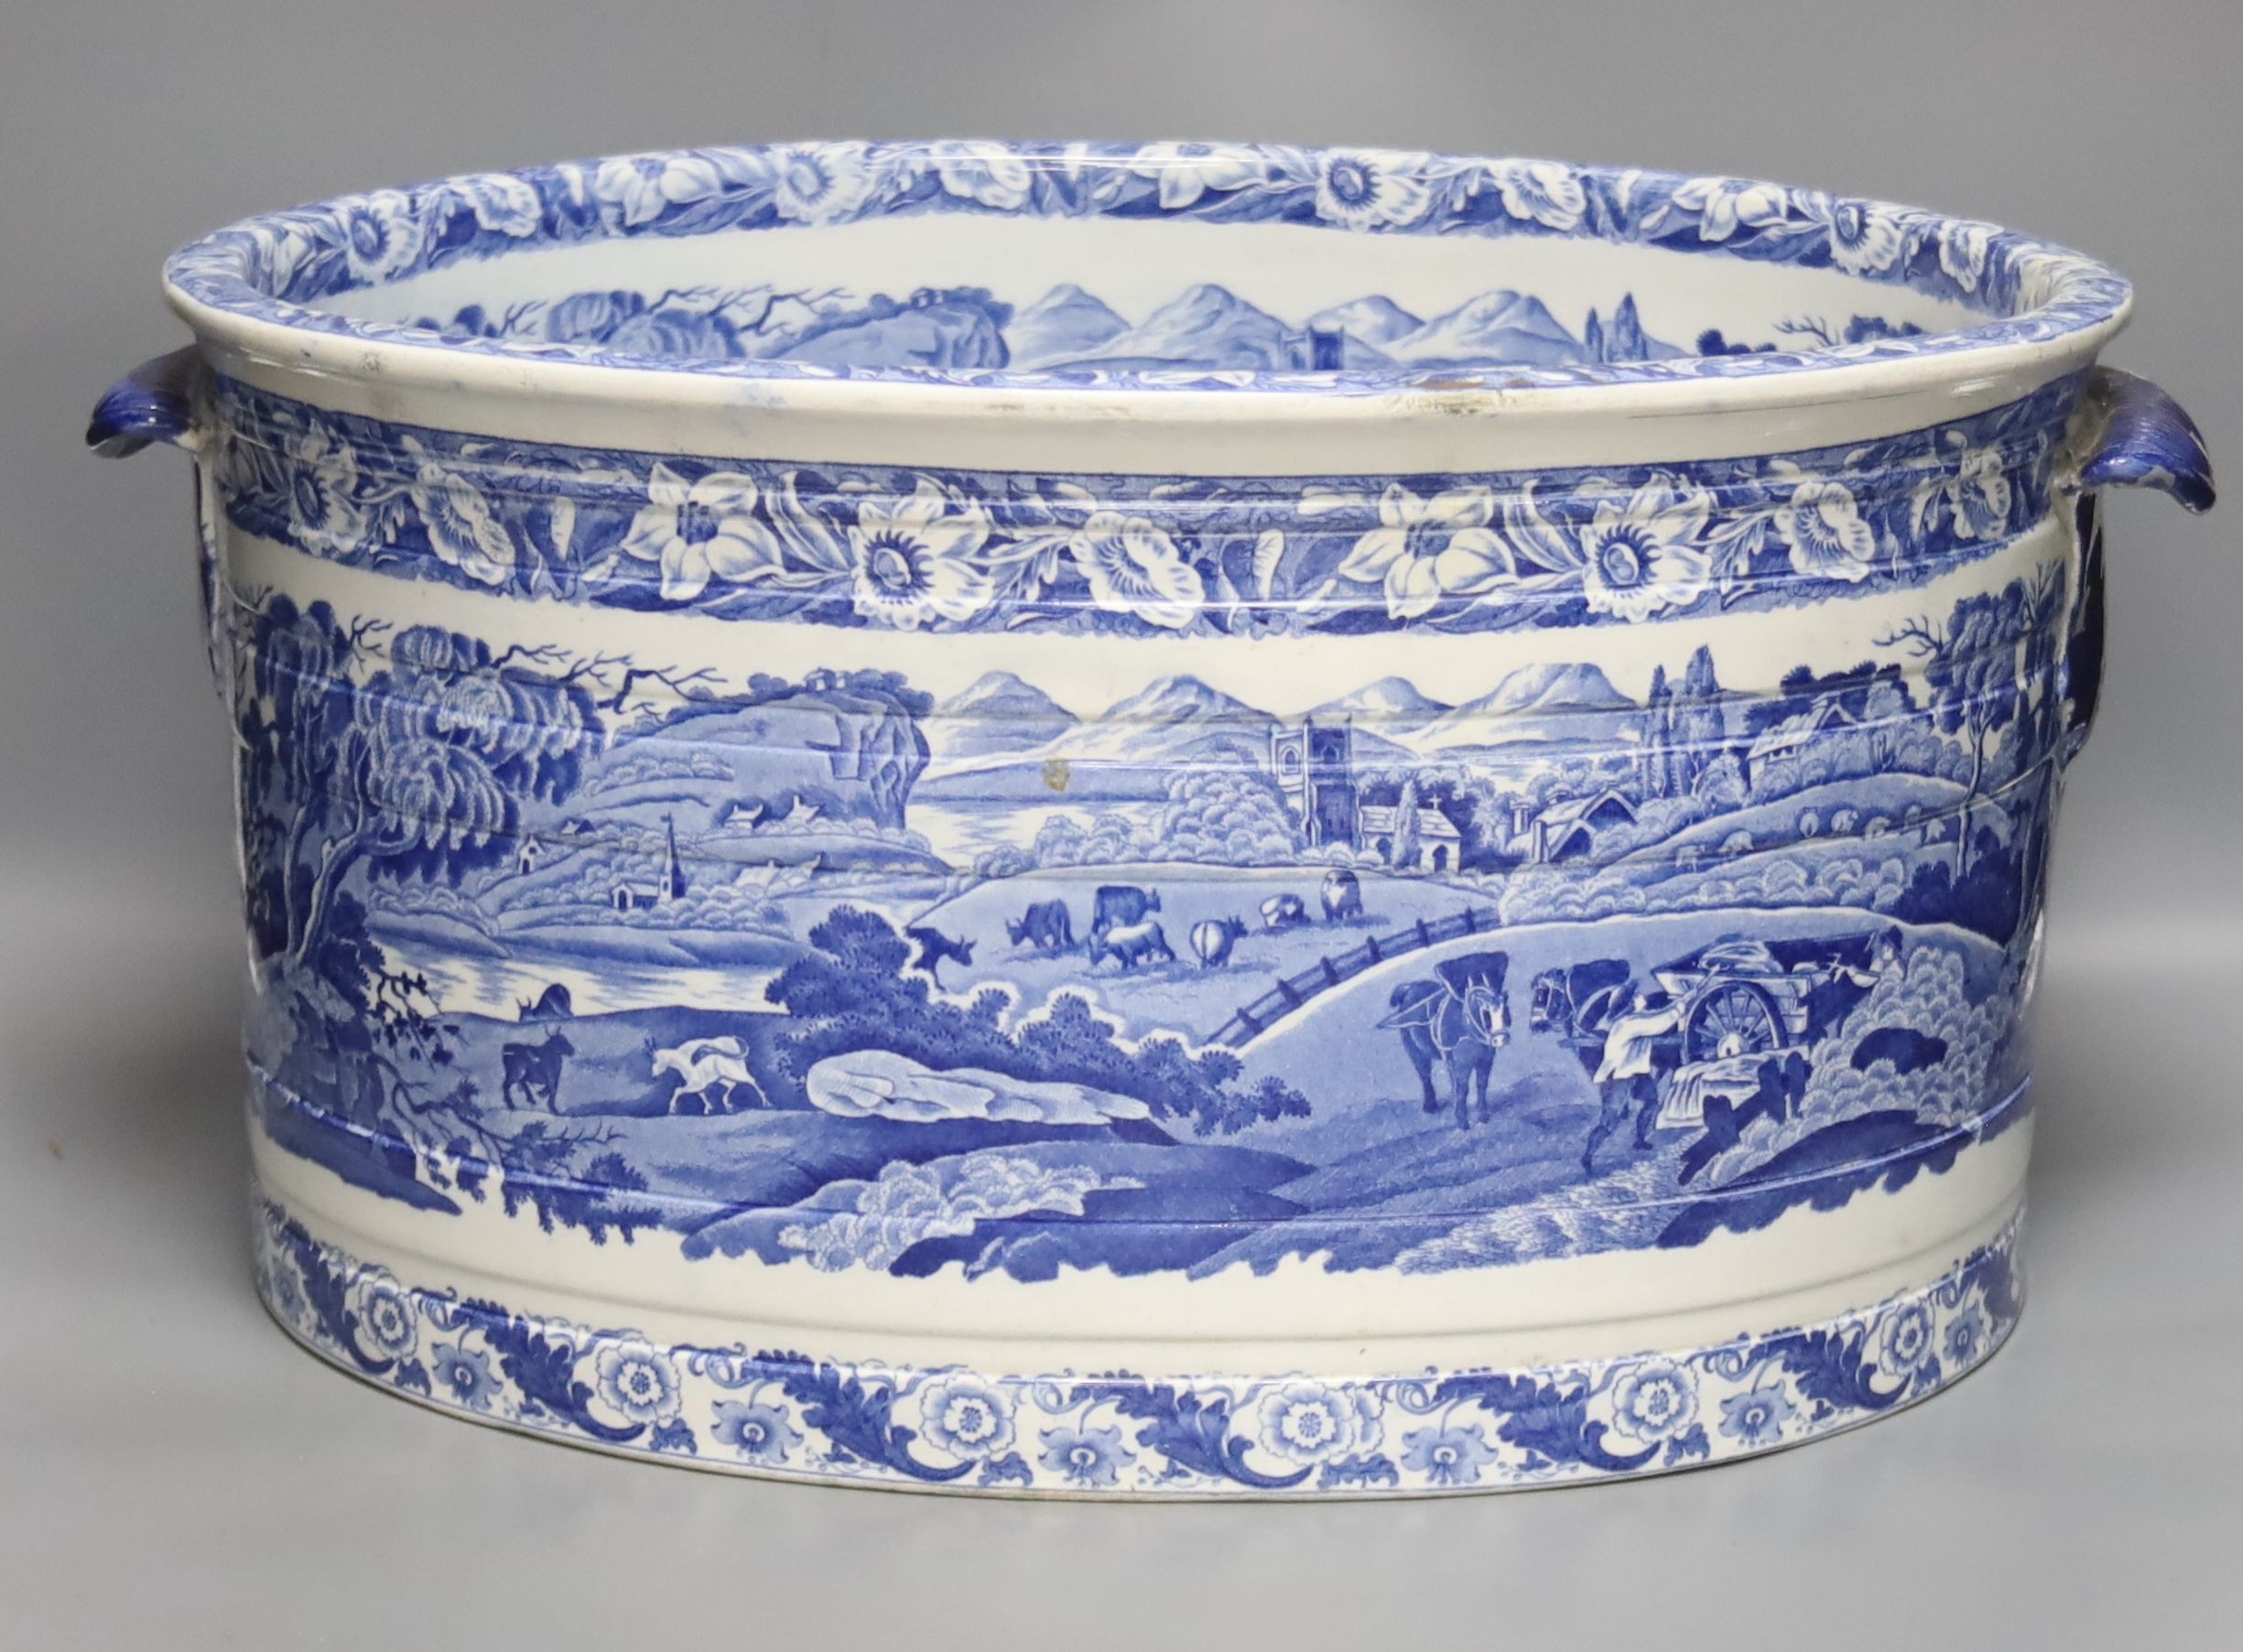 A Victorian Staffordshire blue and white footbath by T. Rathbone & Co., two handled, impressed marked, width 48cm